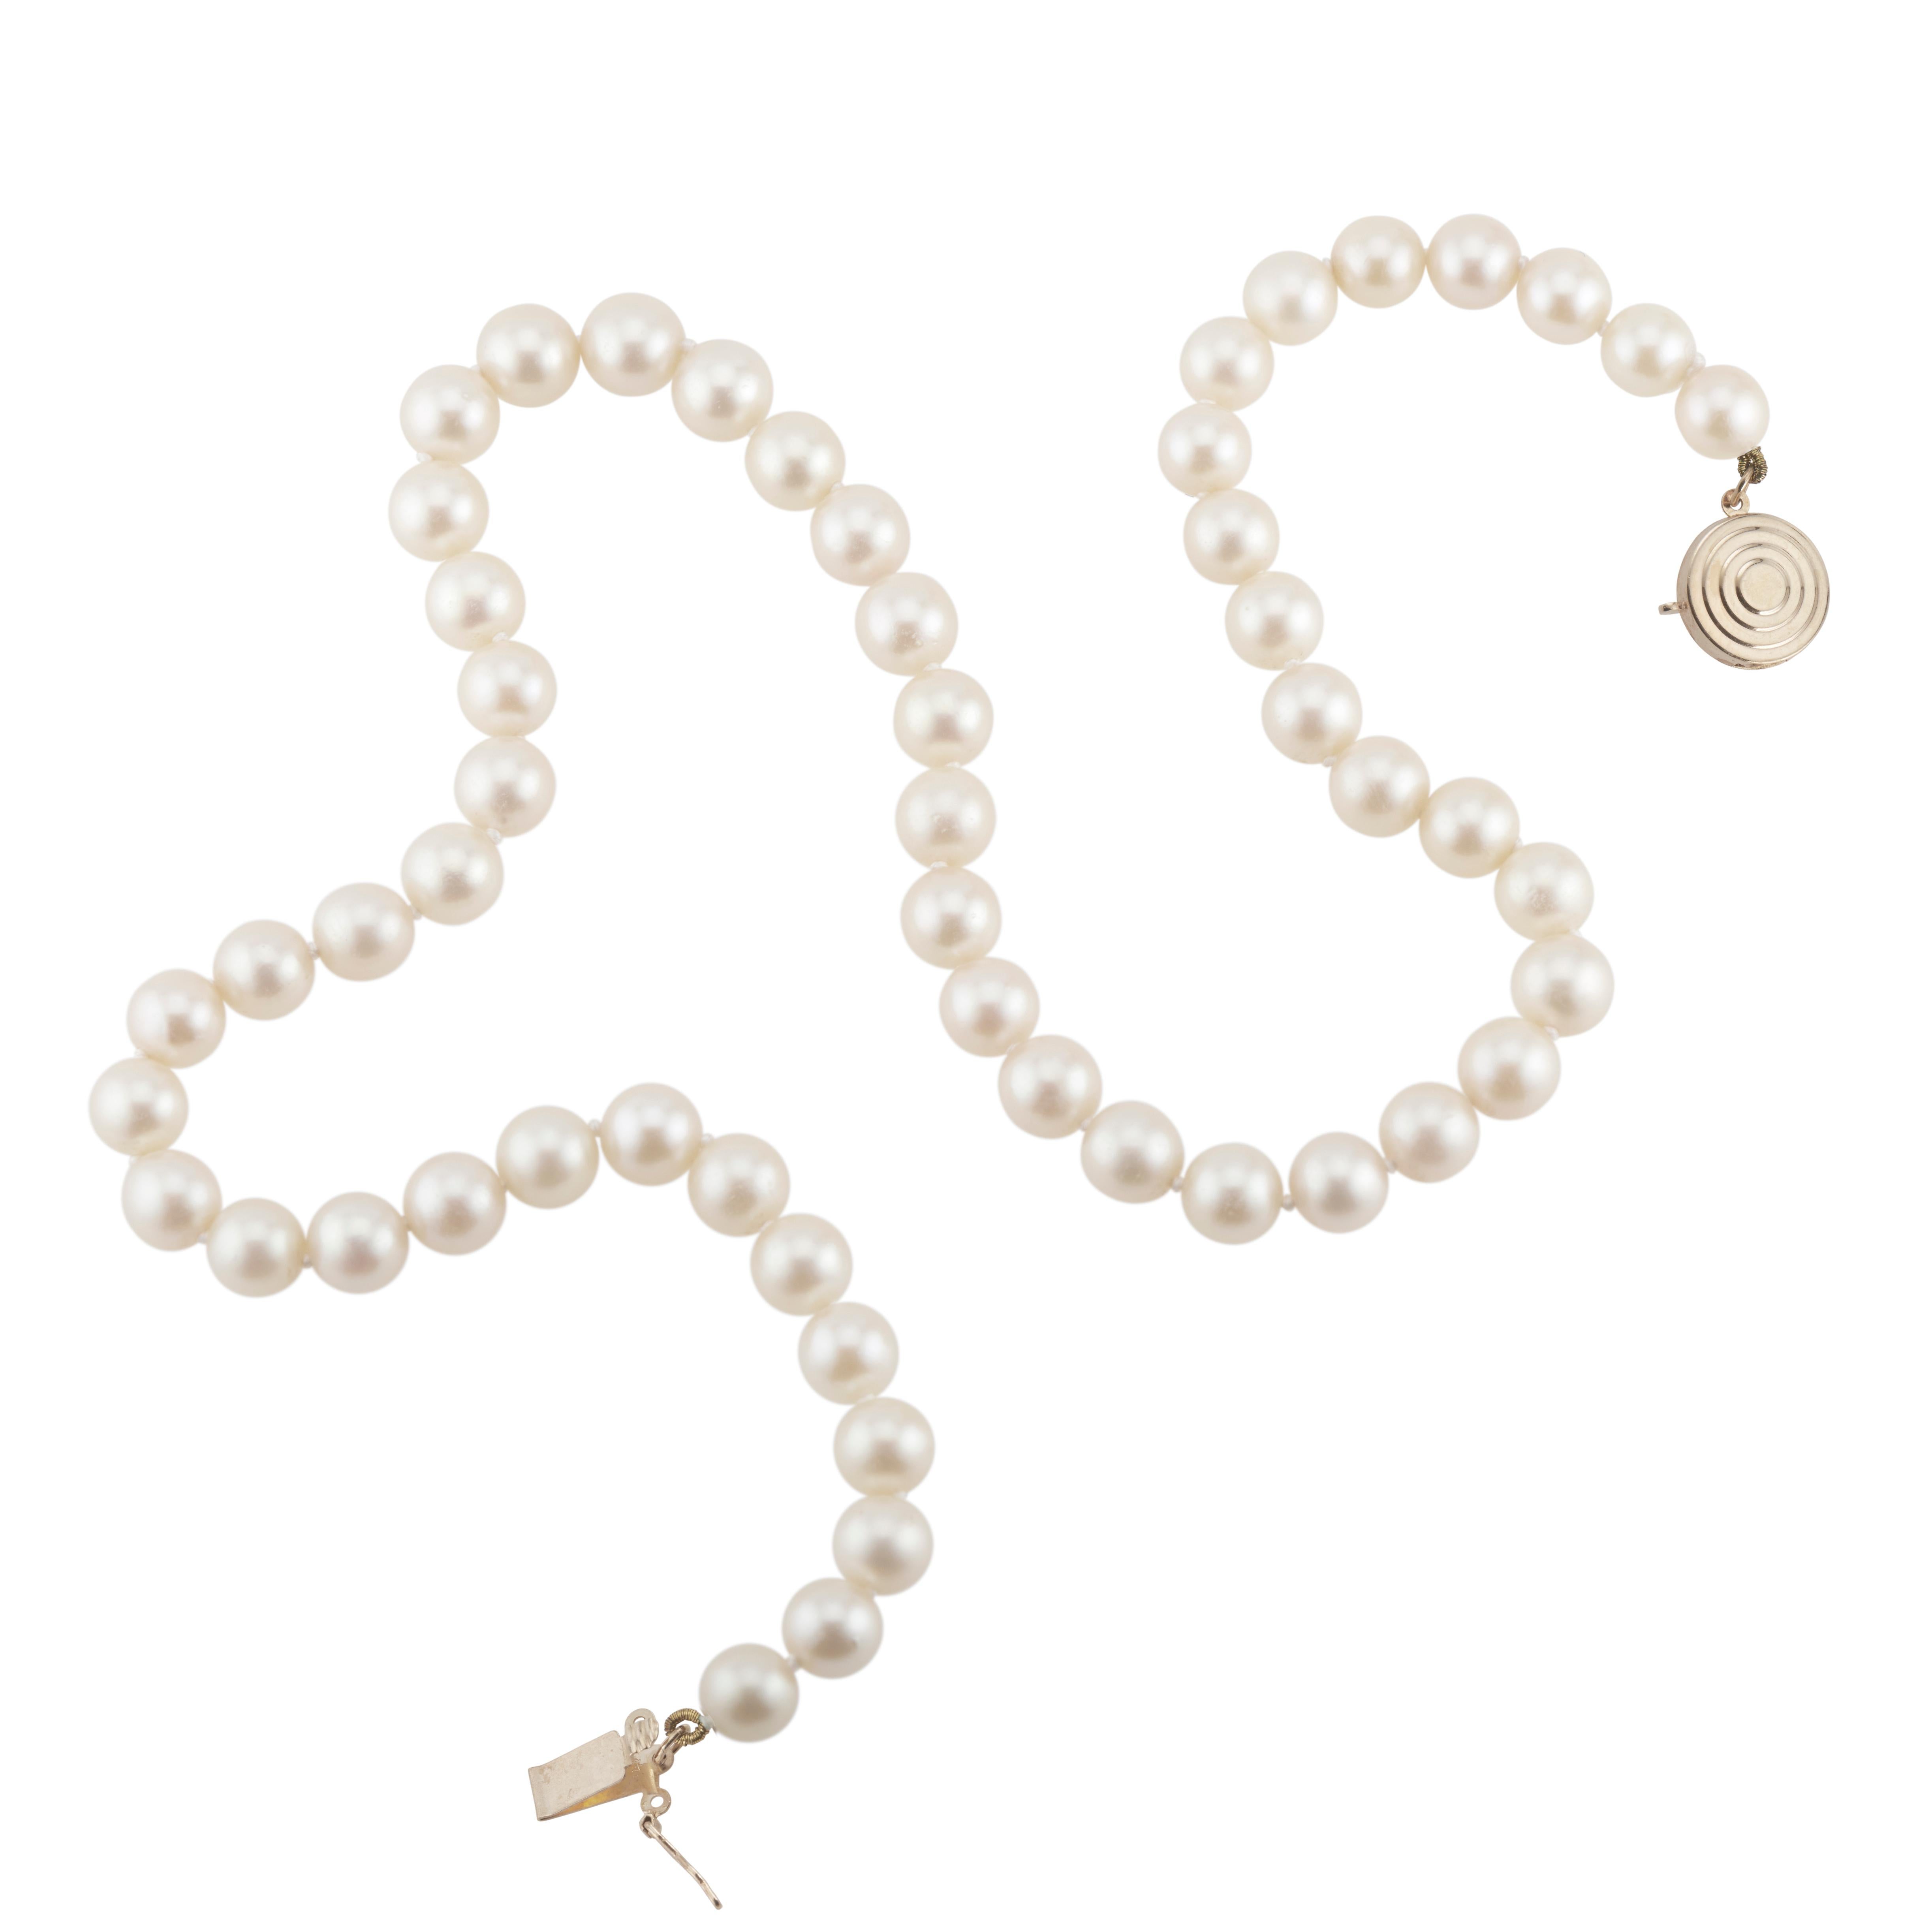 28-Inch-long cultured pearl necklace, white with creme and light pink overtones, few blemishes, good lustre. 90 Freshly strung pearls. Just a note, this strand of pearls does have knots in between each pearl. They are visible in the last picture